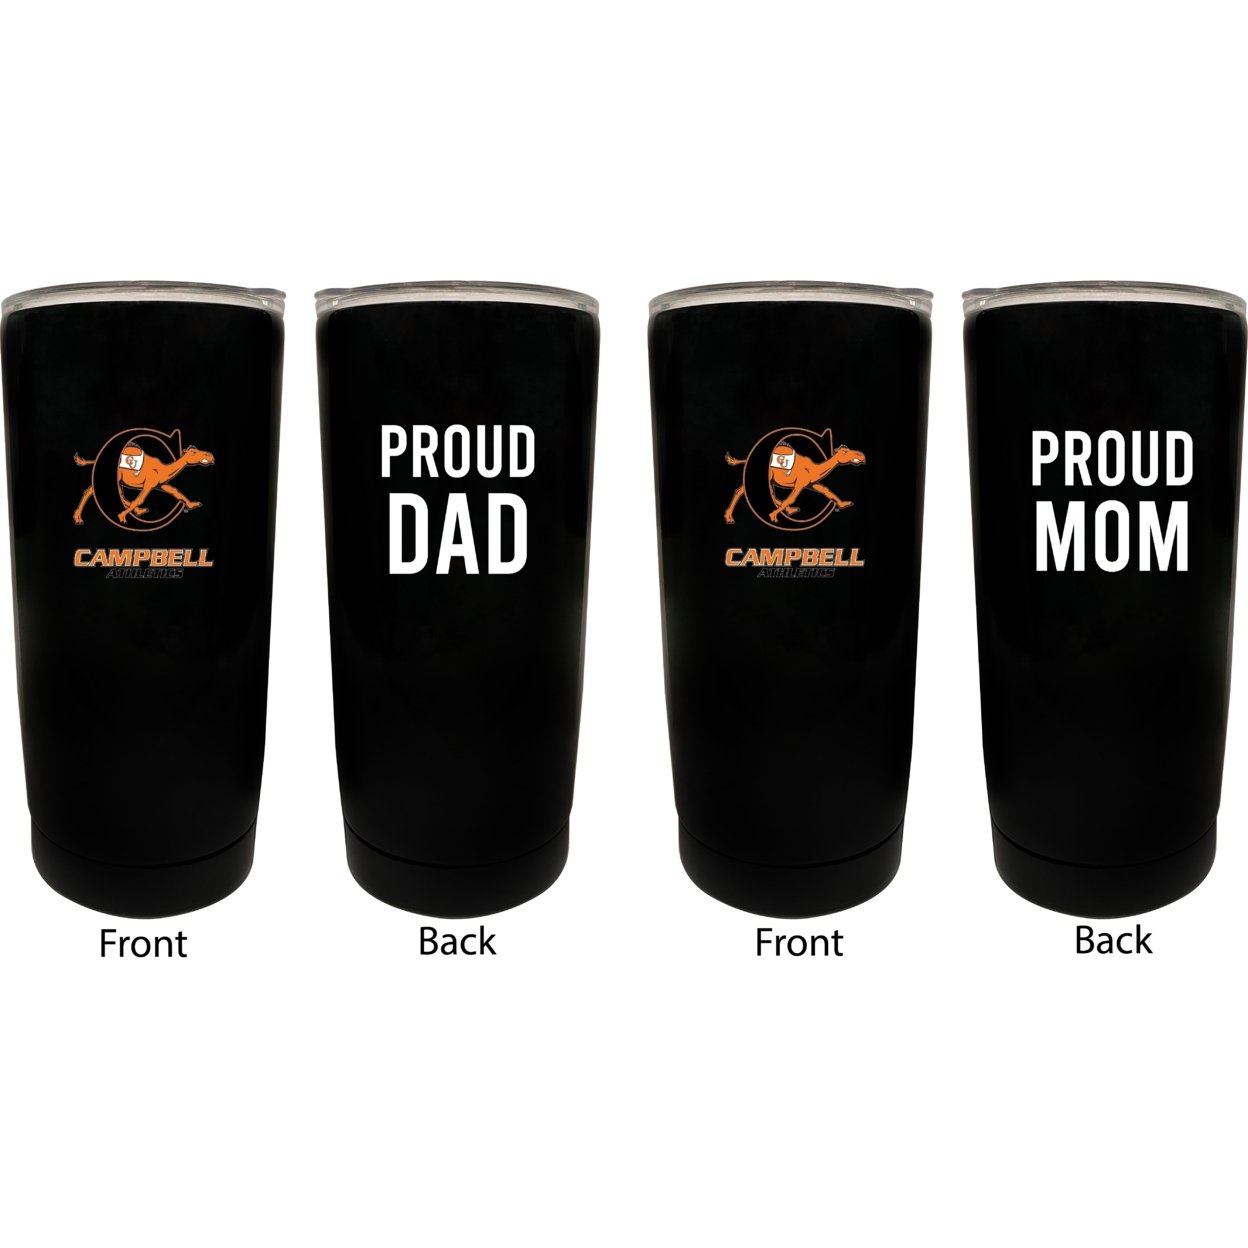 Campbell University Fighting Camels Proud Mom And Dad 16 Oz Insulated Stainless Steel Tumblers 2 Pack Black.